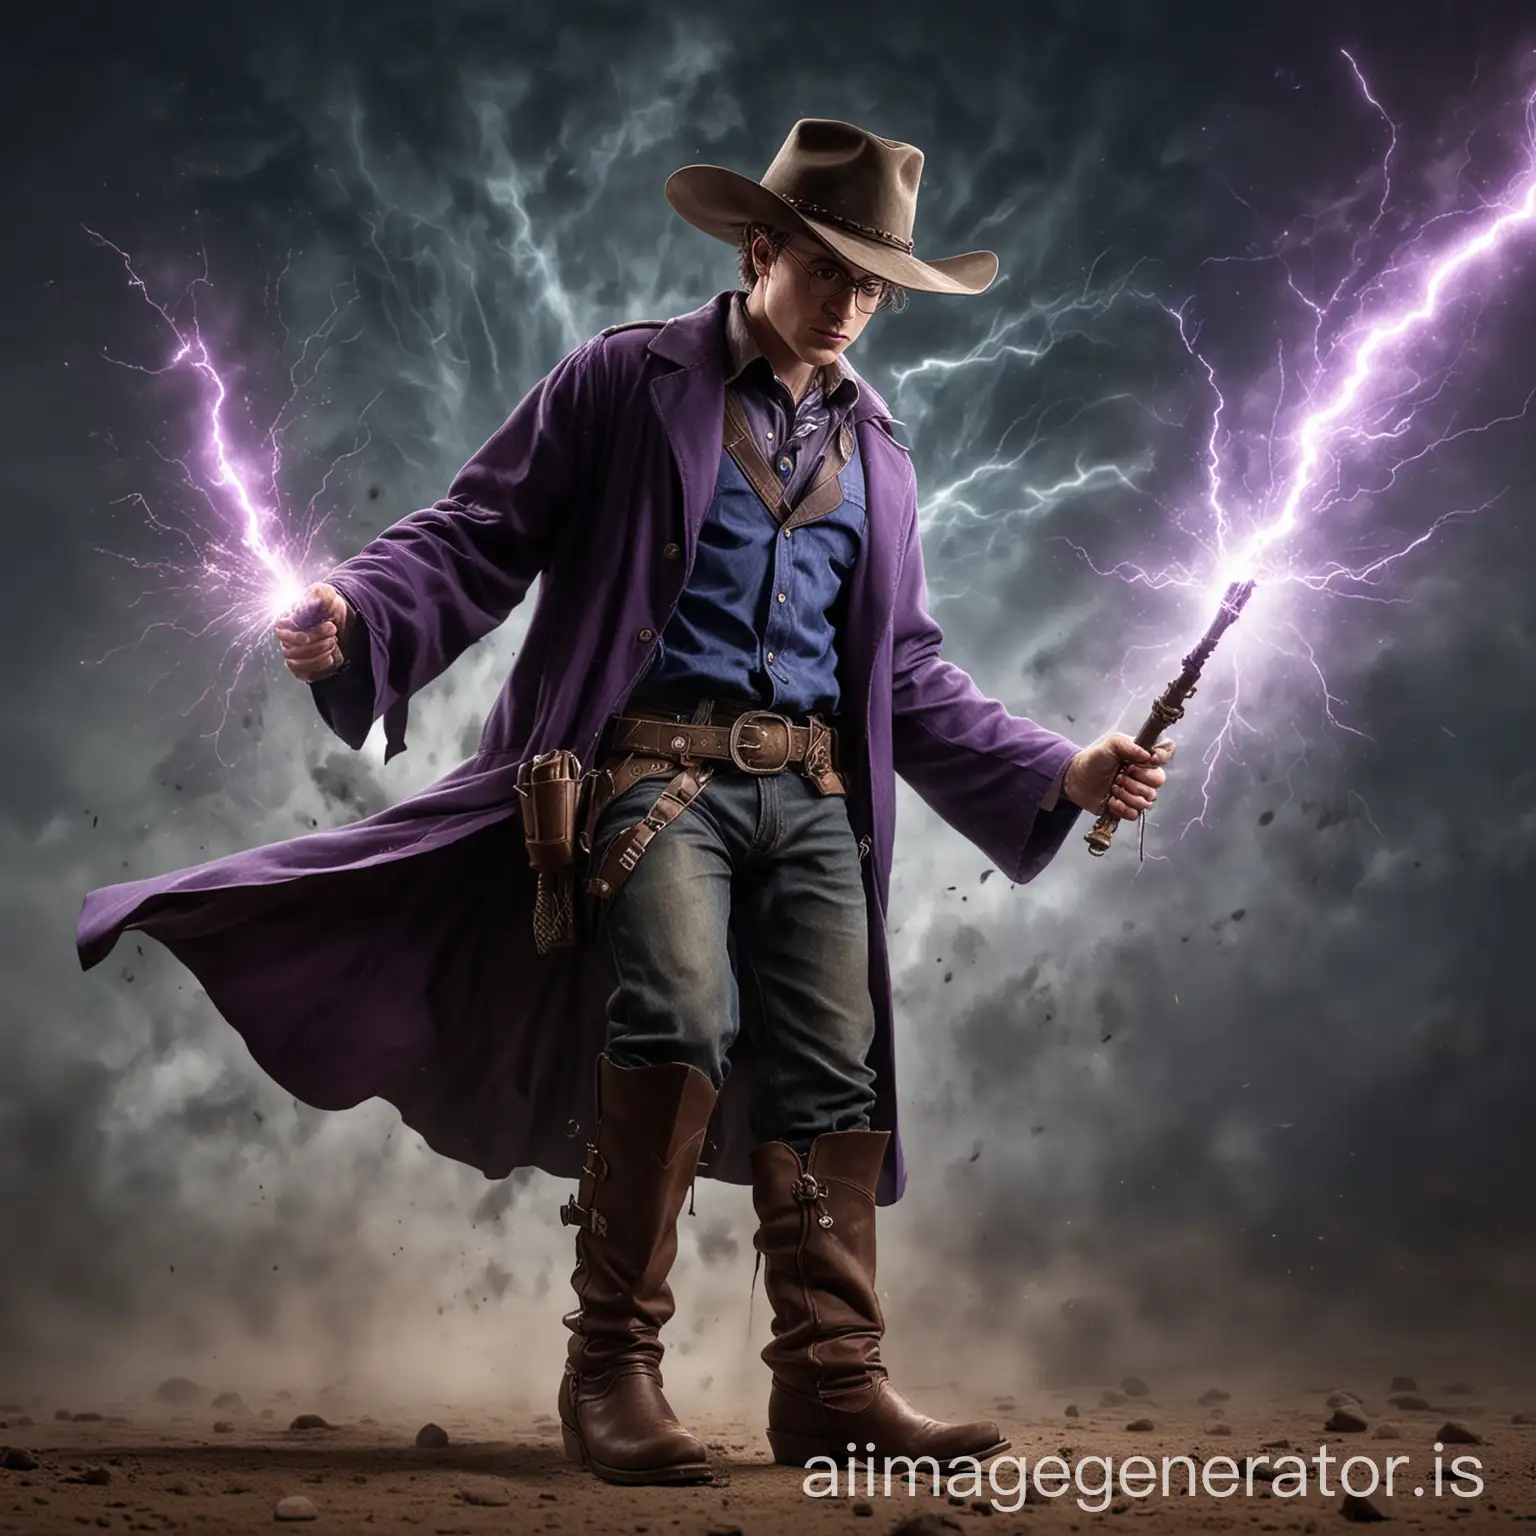 A realistically looking American Texan version of Harry Potter in a cowboy hat and boots with spurs holding a magic wand-revolver, which is shooting a blue and purple bolt of lightning out of the barrel.